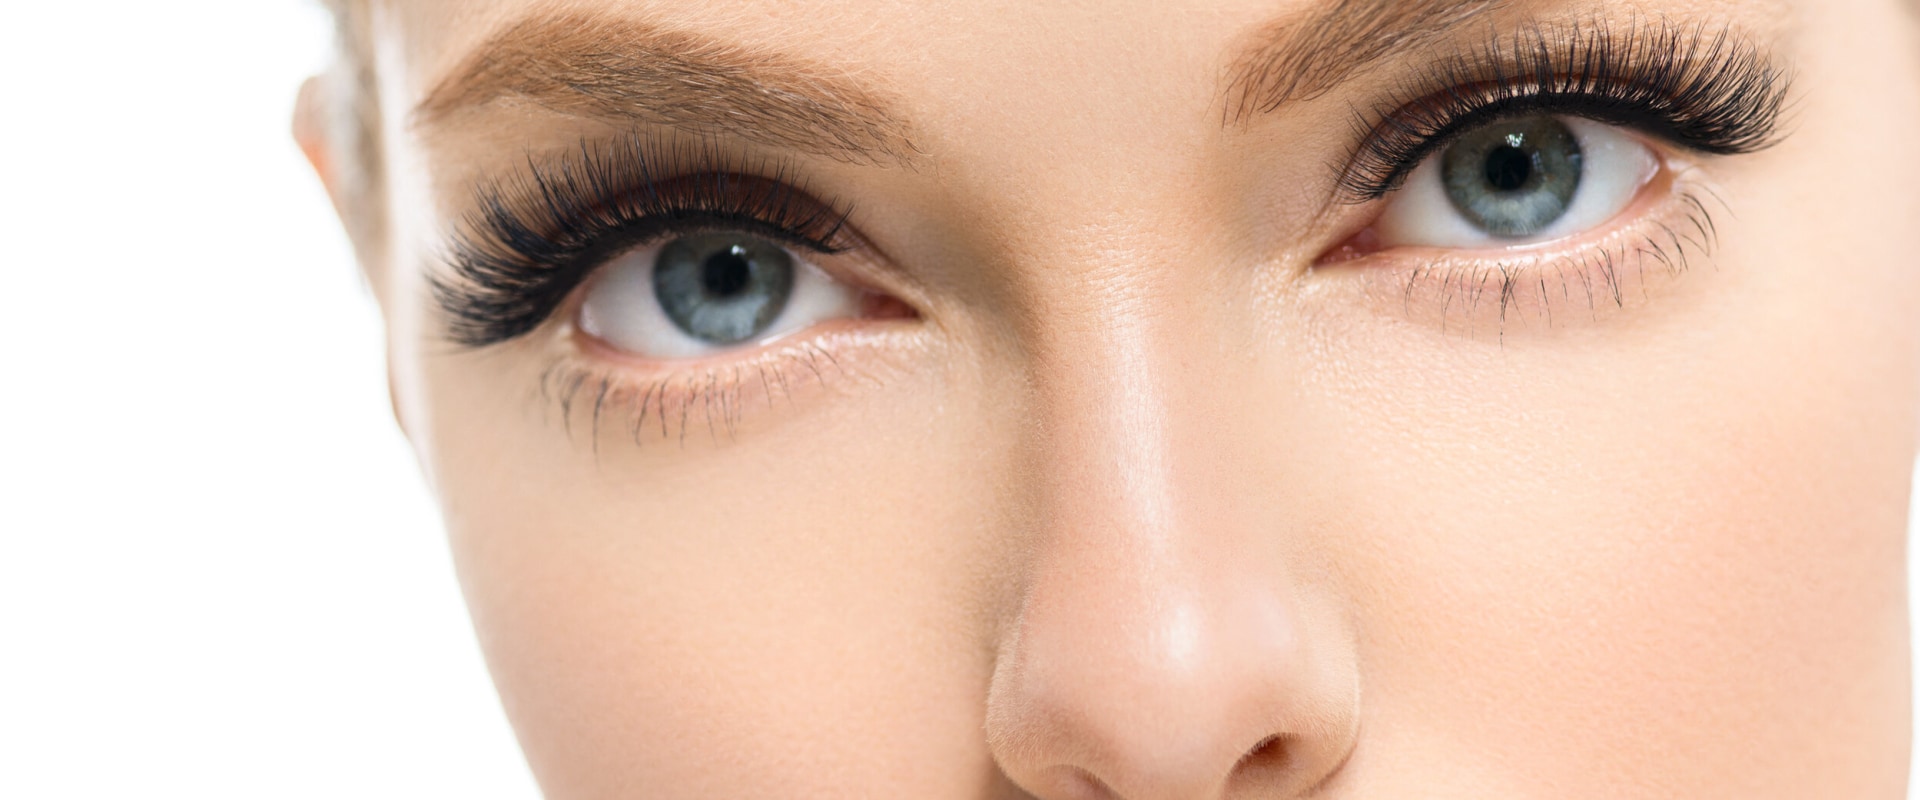 Are there different types of lash extensions?